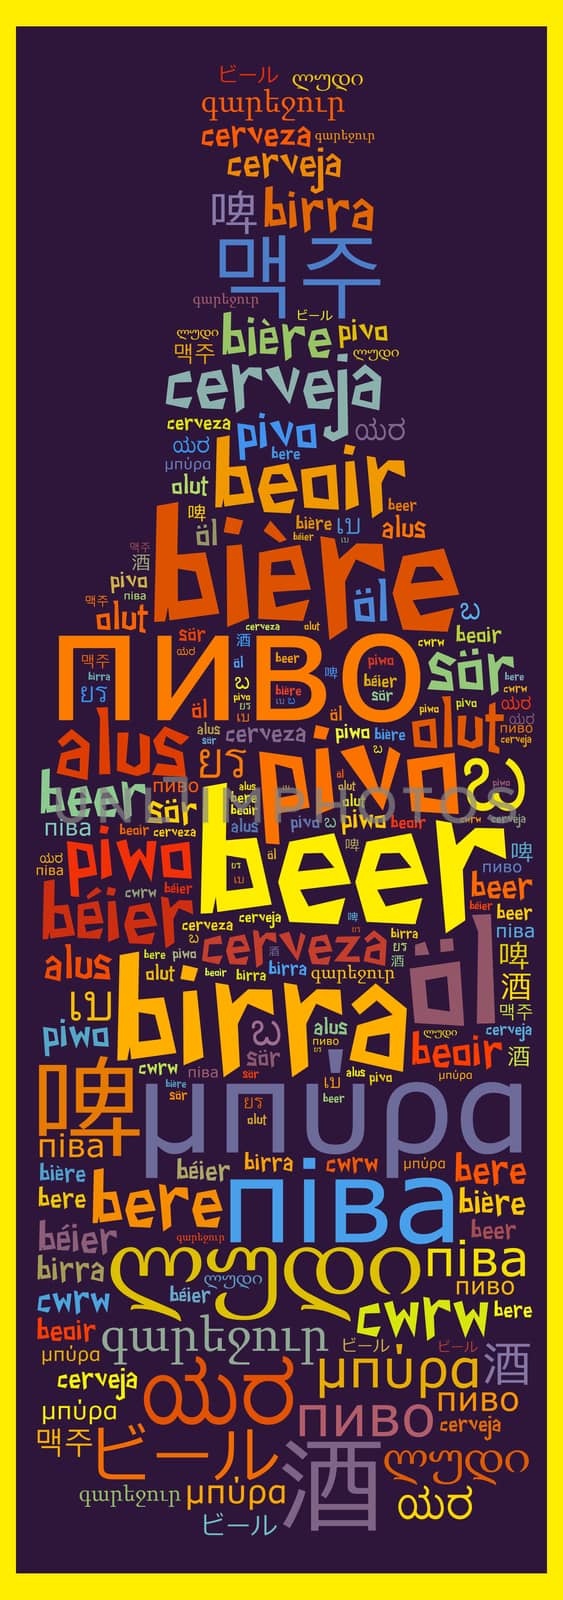 Word Beer in different languages word cloud concept